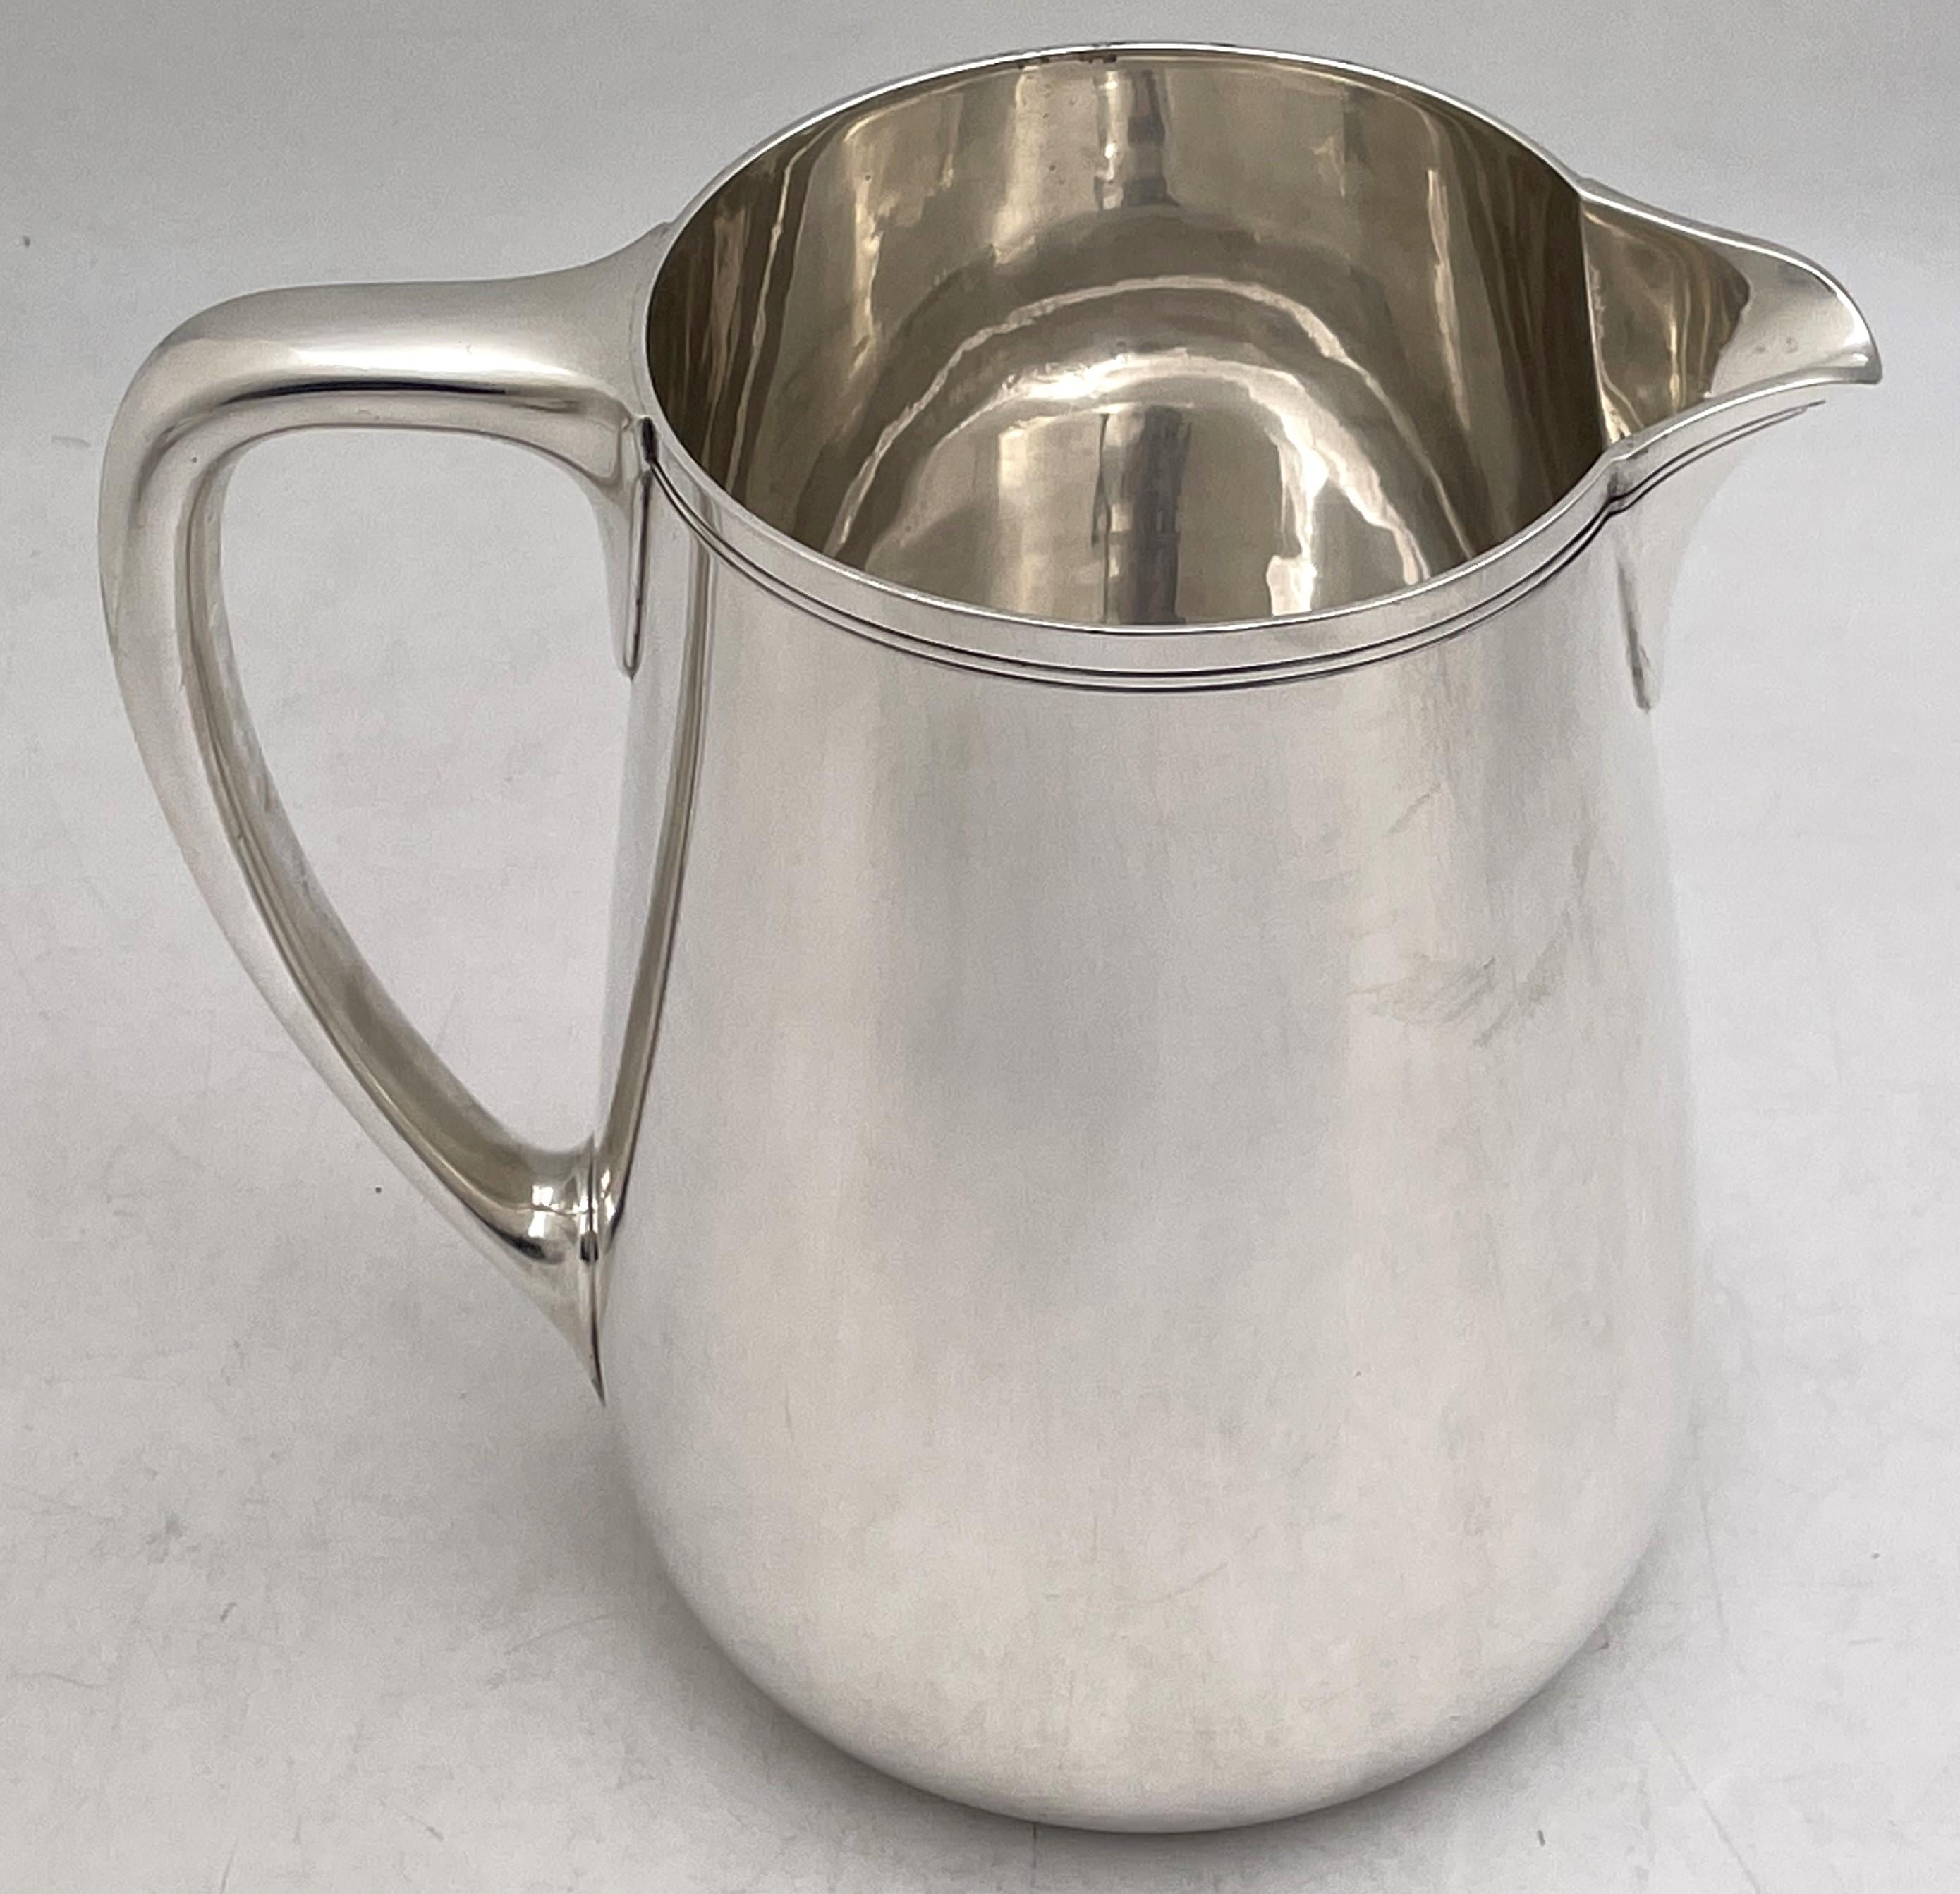 Tiffany & Co. sterling silver bar pitcher in Mid-Century Modern style, with an elegant, geometric design, made in the late 1940s or early 1950s. It measures 6 2/3'' in height by 6 3/4'' from handle to spout, weighs 21 troy ounces, and bears